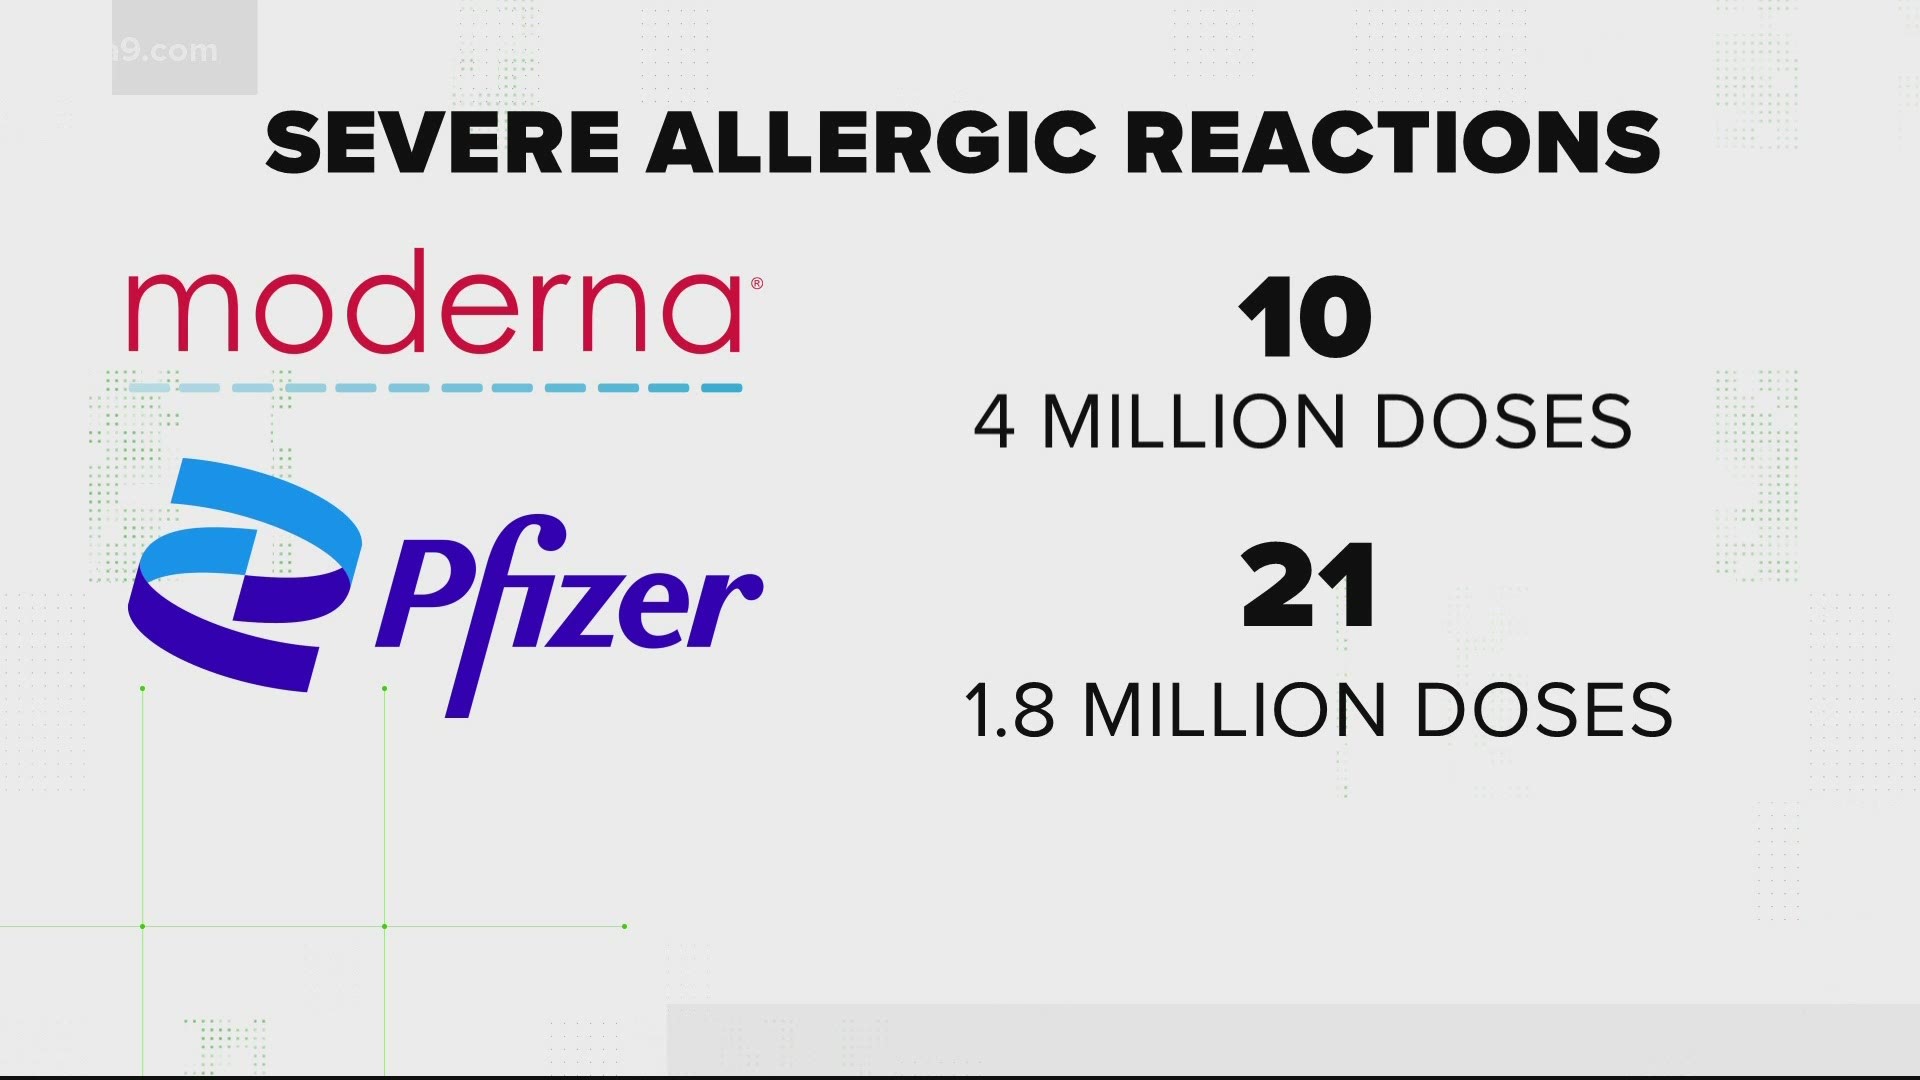 Both the Pfizer and Moderna vaccines have seen rare allergic reactions to the shots. Medical professionals are prepared for this.